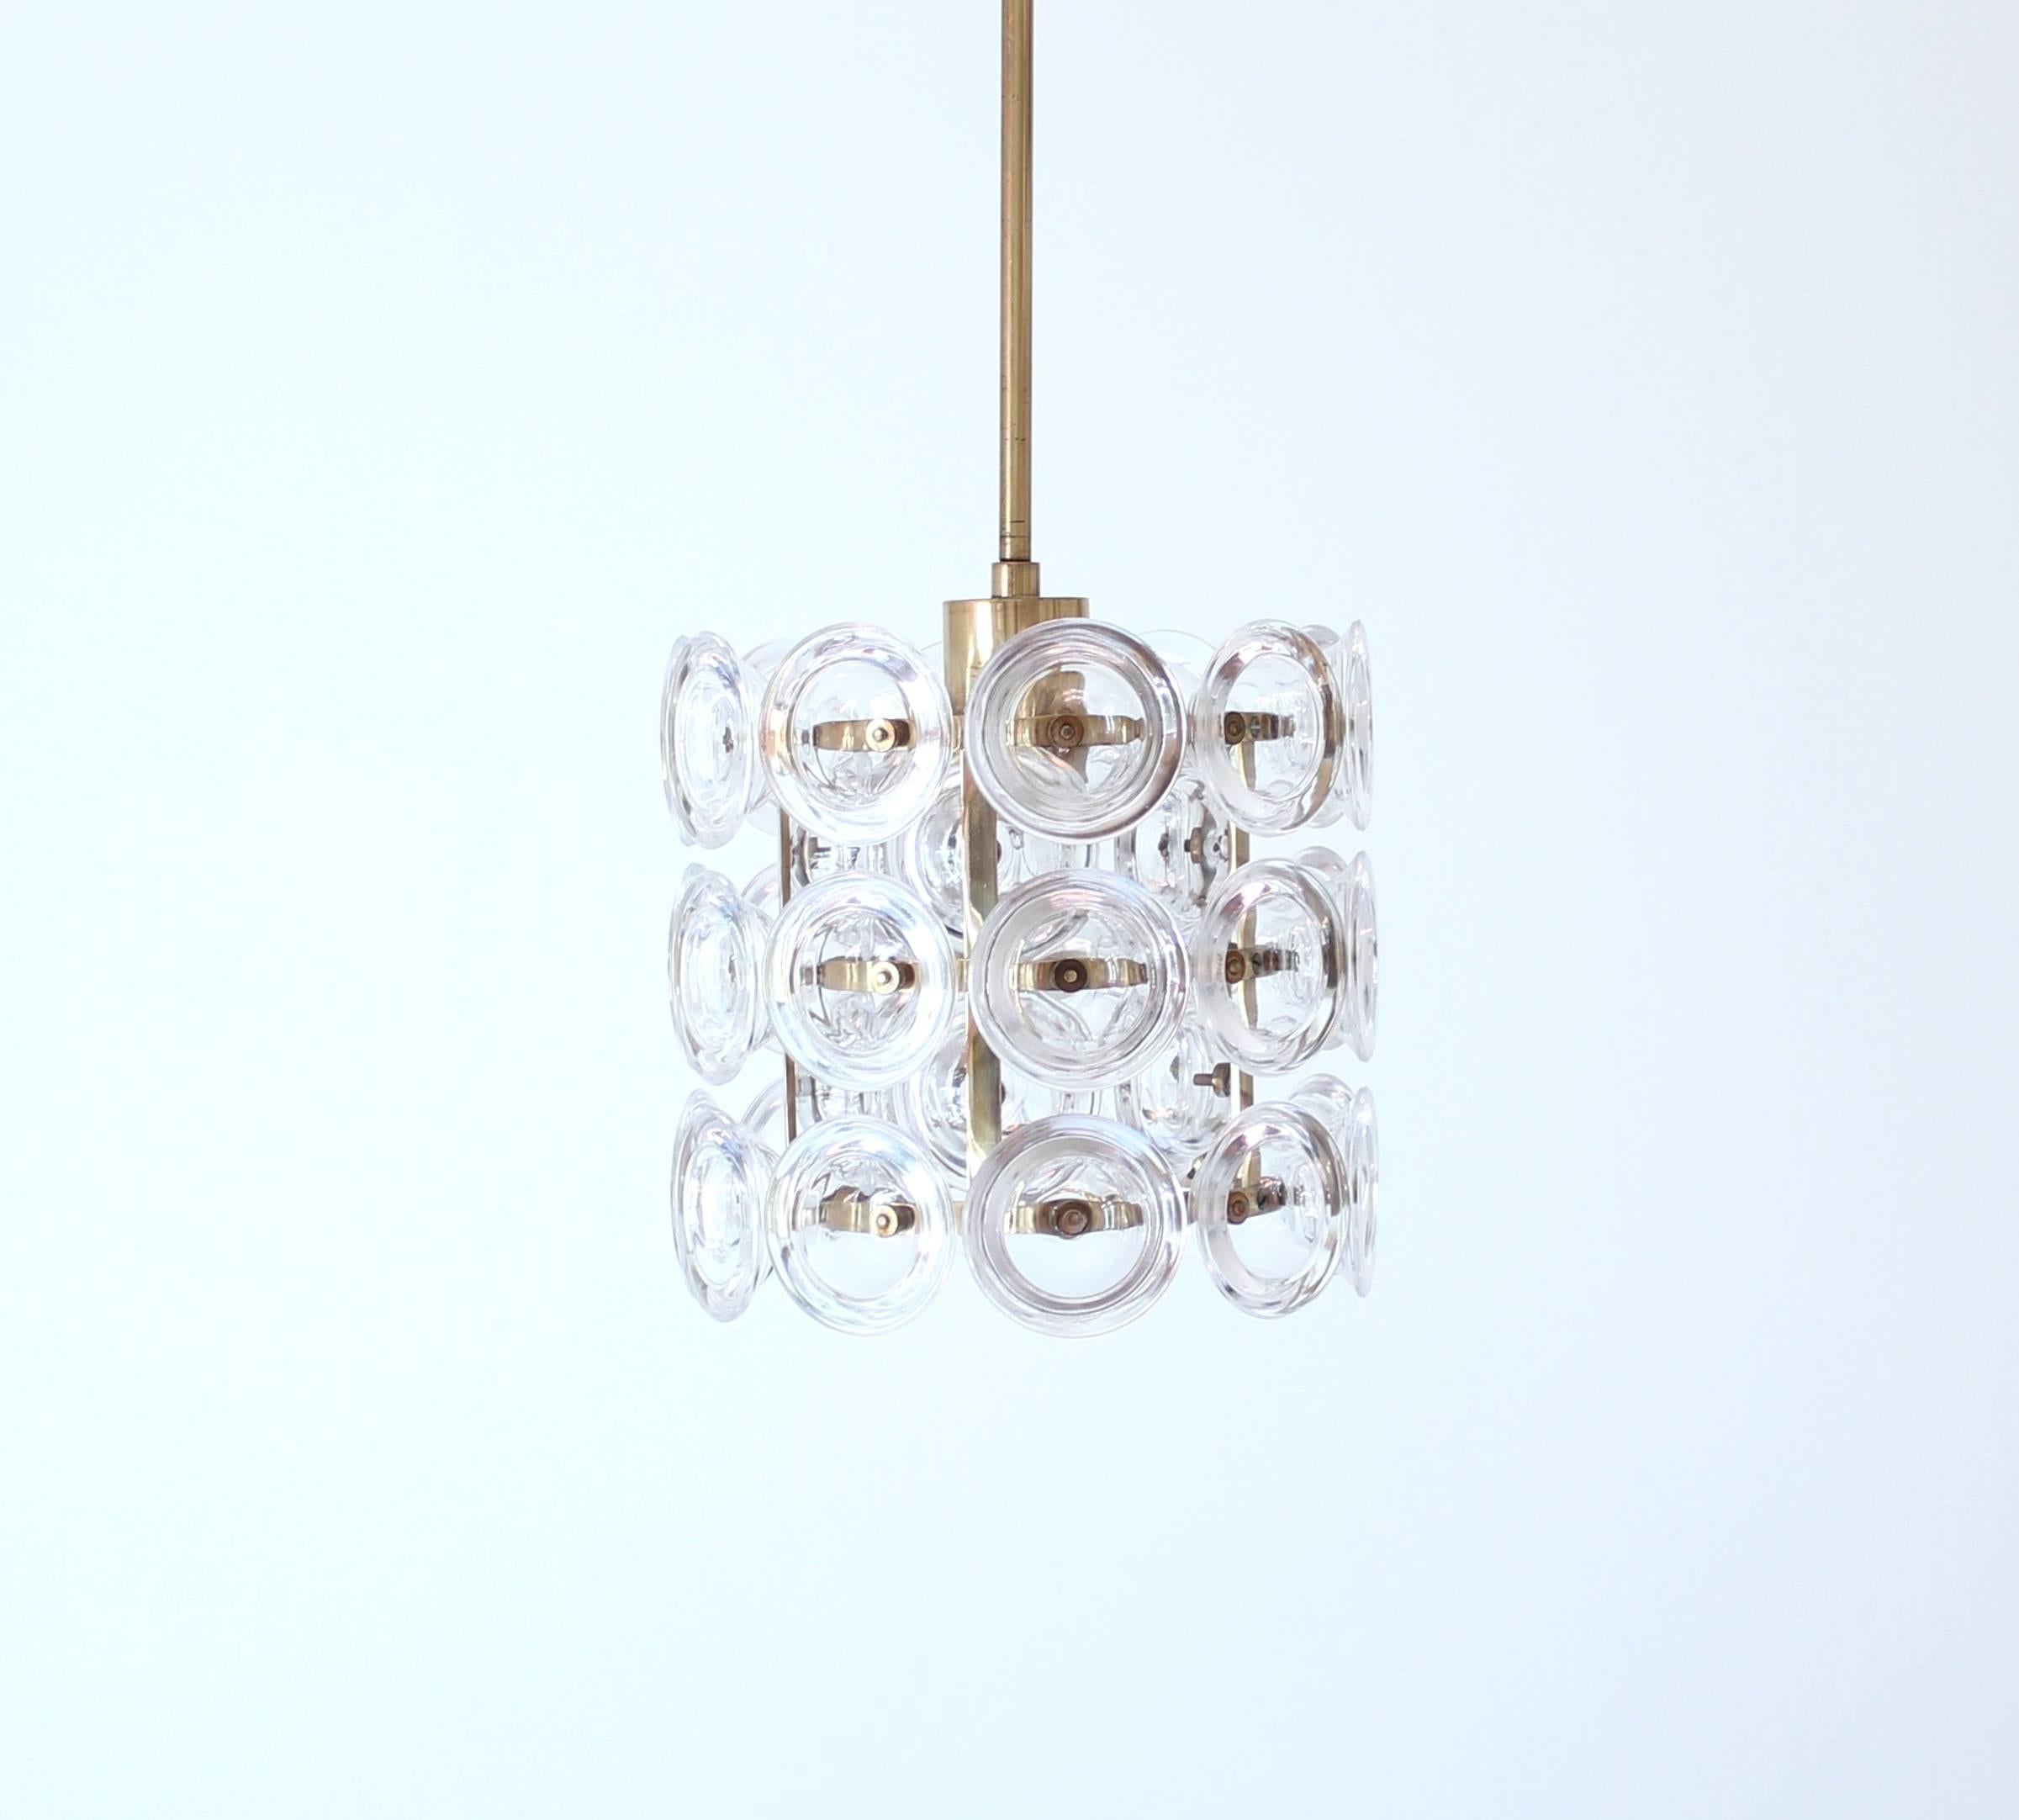 Rare glass and brass pendant designed by Carl Fagerlund for Swedish glass icon Orrefors in the 1960s. It consists of round glass discs on a brass frame. Good vintage condition.